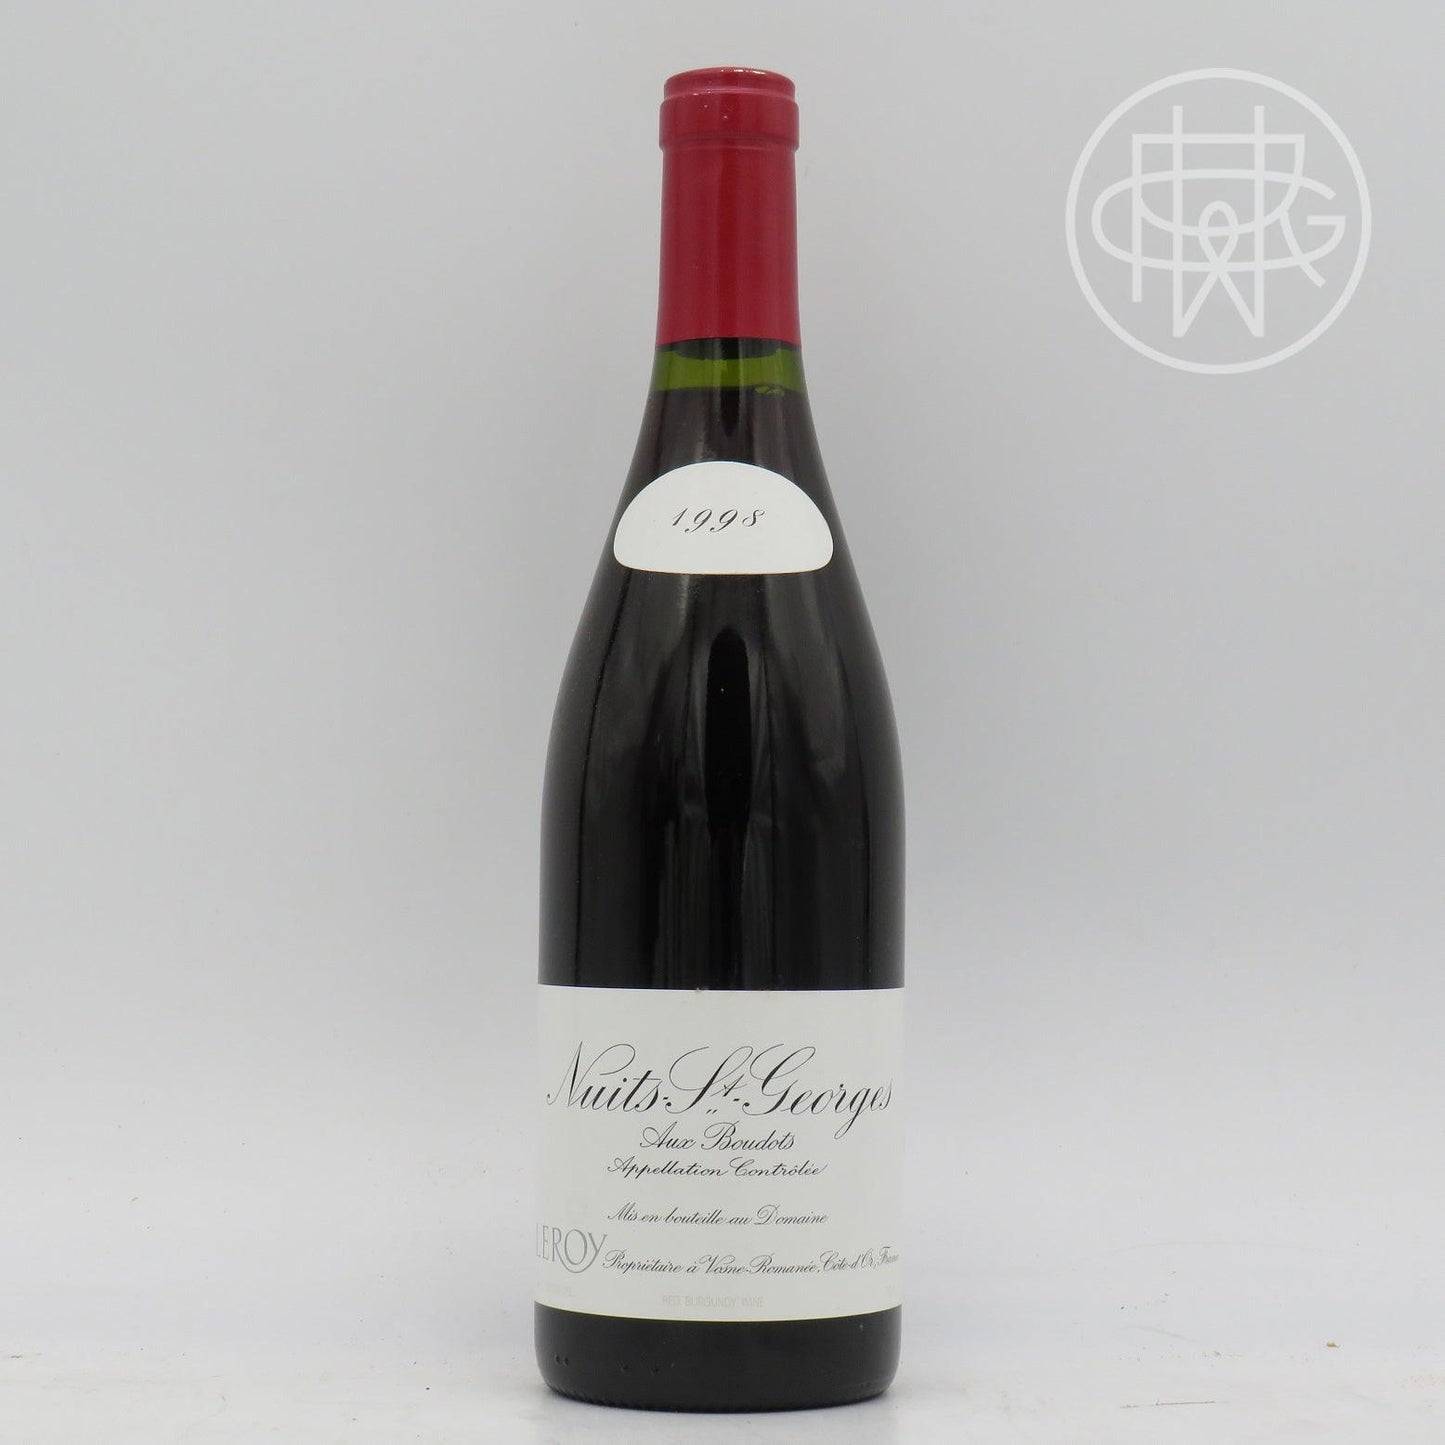 Leroy Nuits St. Georges Les Boudots 1998 750mL - GRW Wine Collection